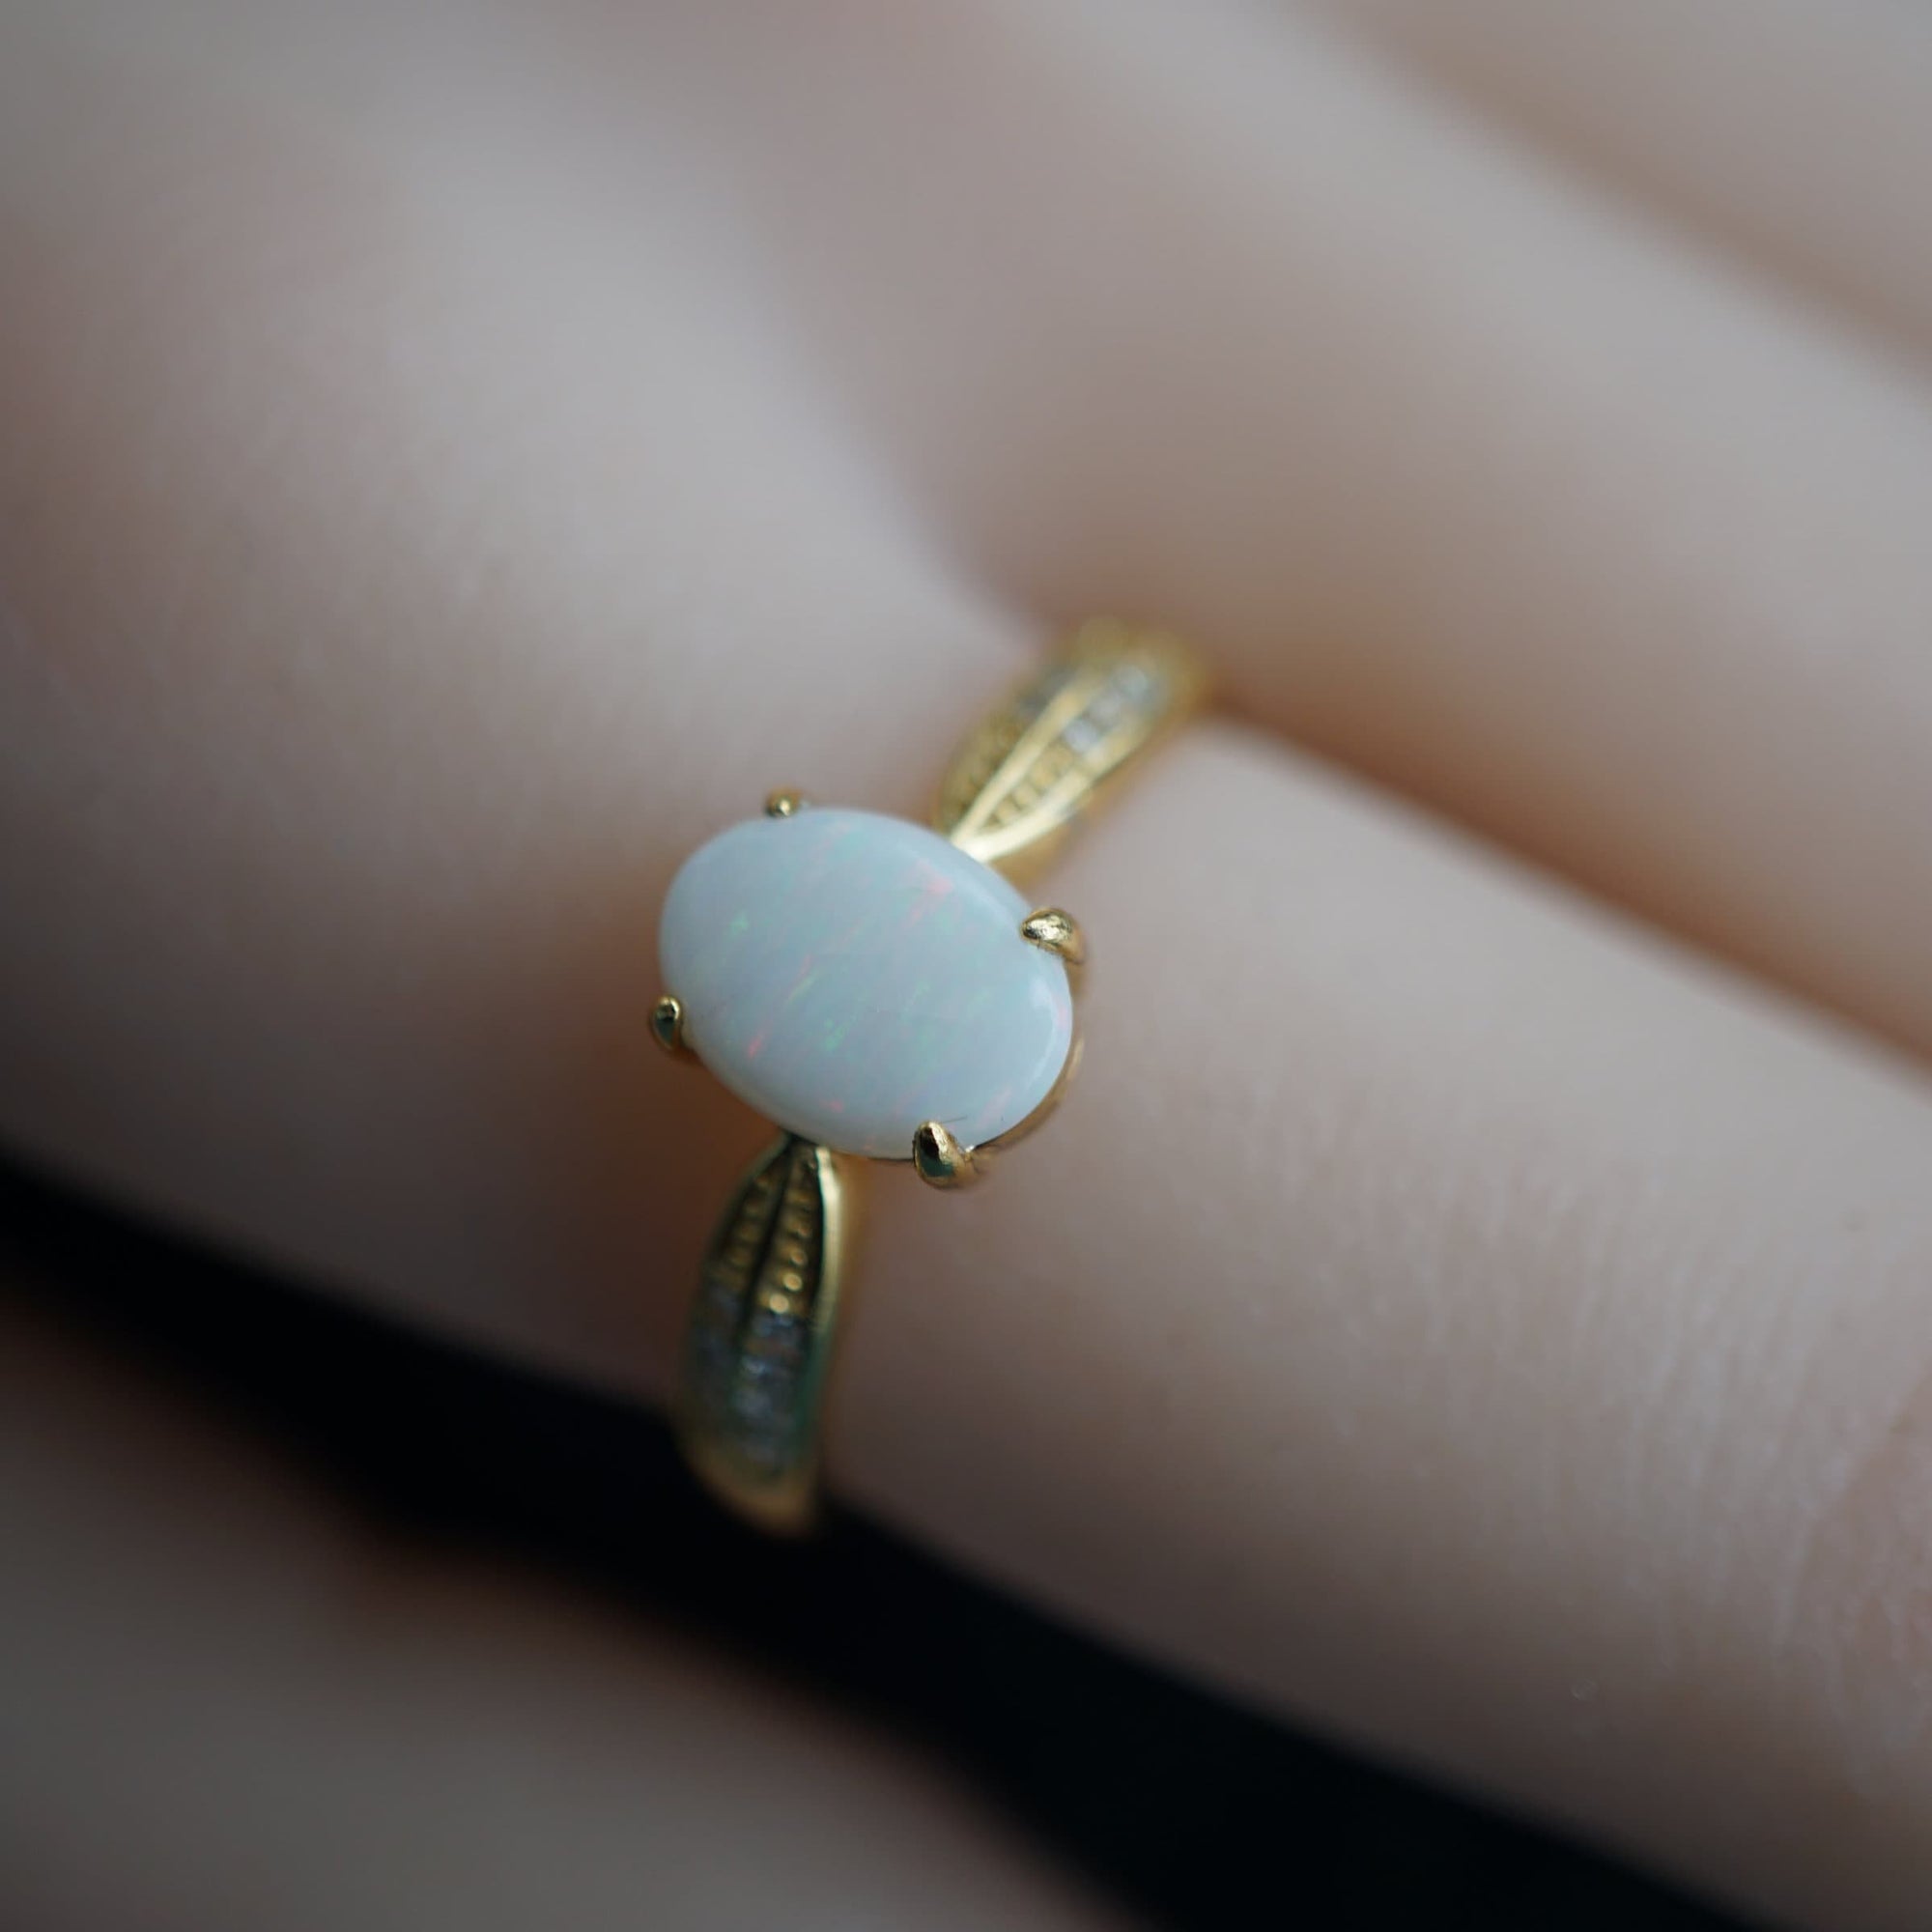 White Solid Real Australian Opal Ring In 18k Gold Vermeil Over 925 Sterling Silver, Opal Ring For Her Birthday, Opal Ring For Christmas-Vsabel Jewellery